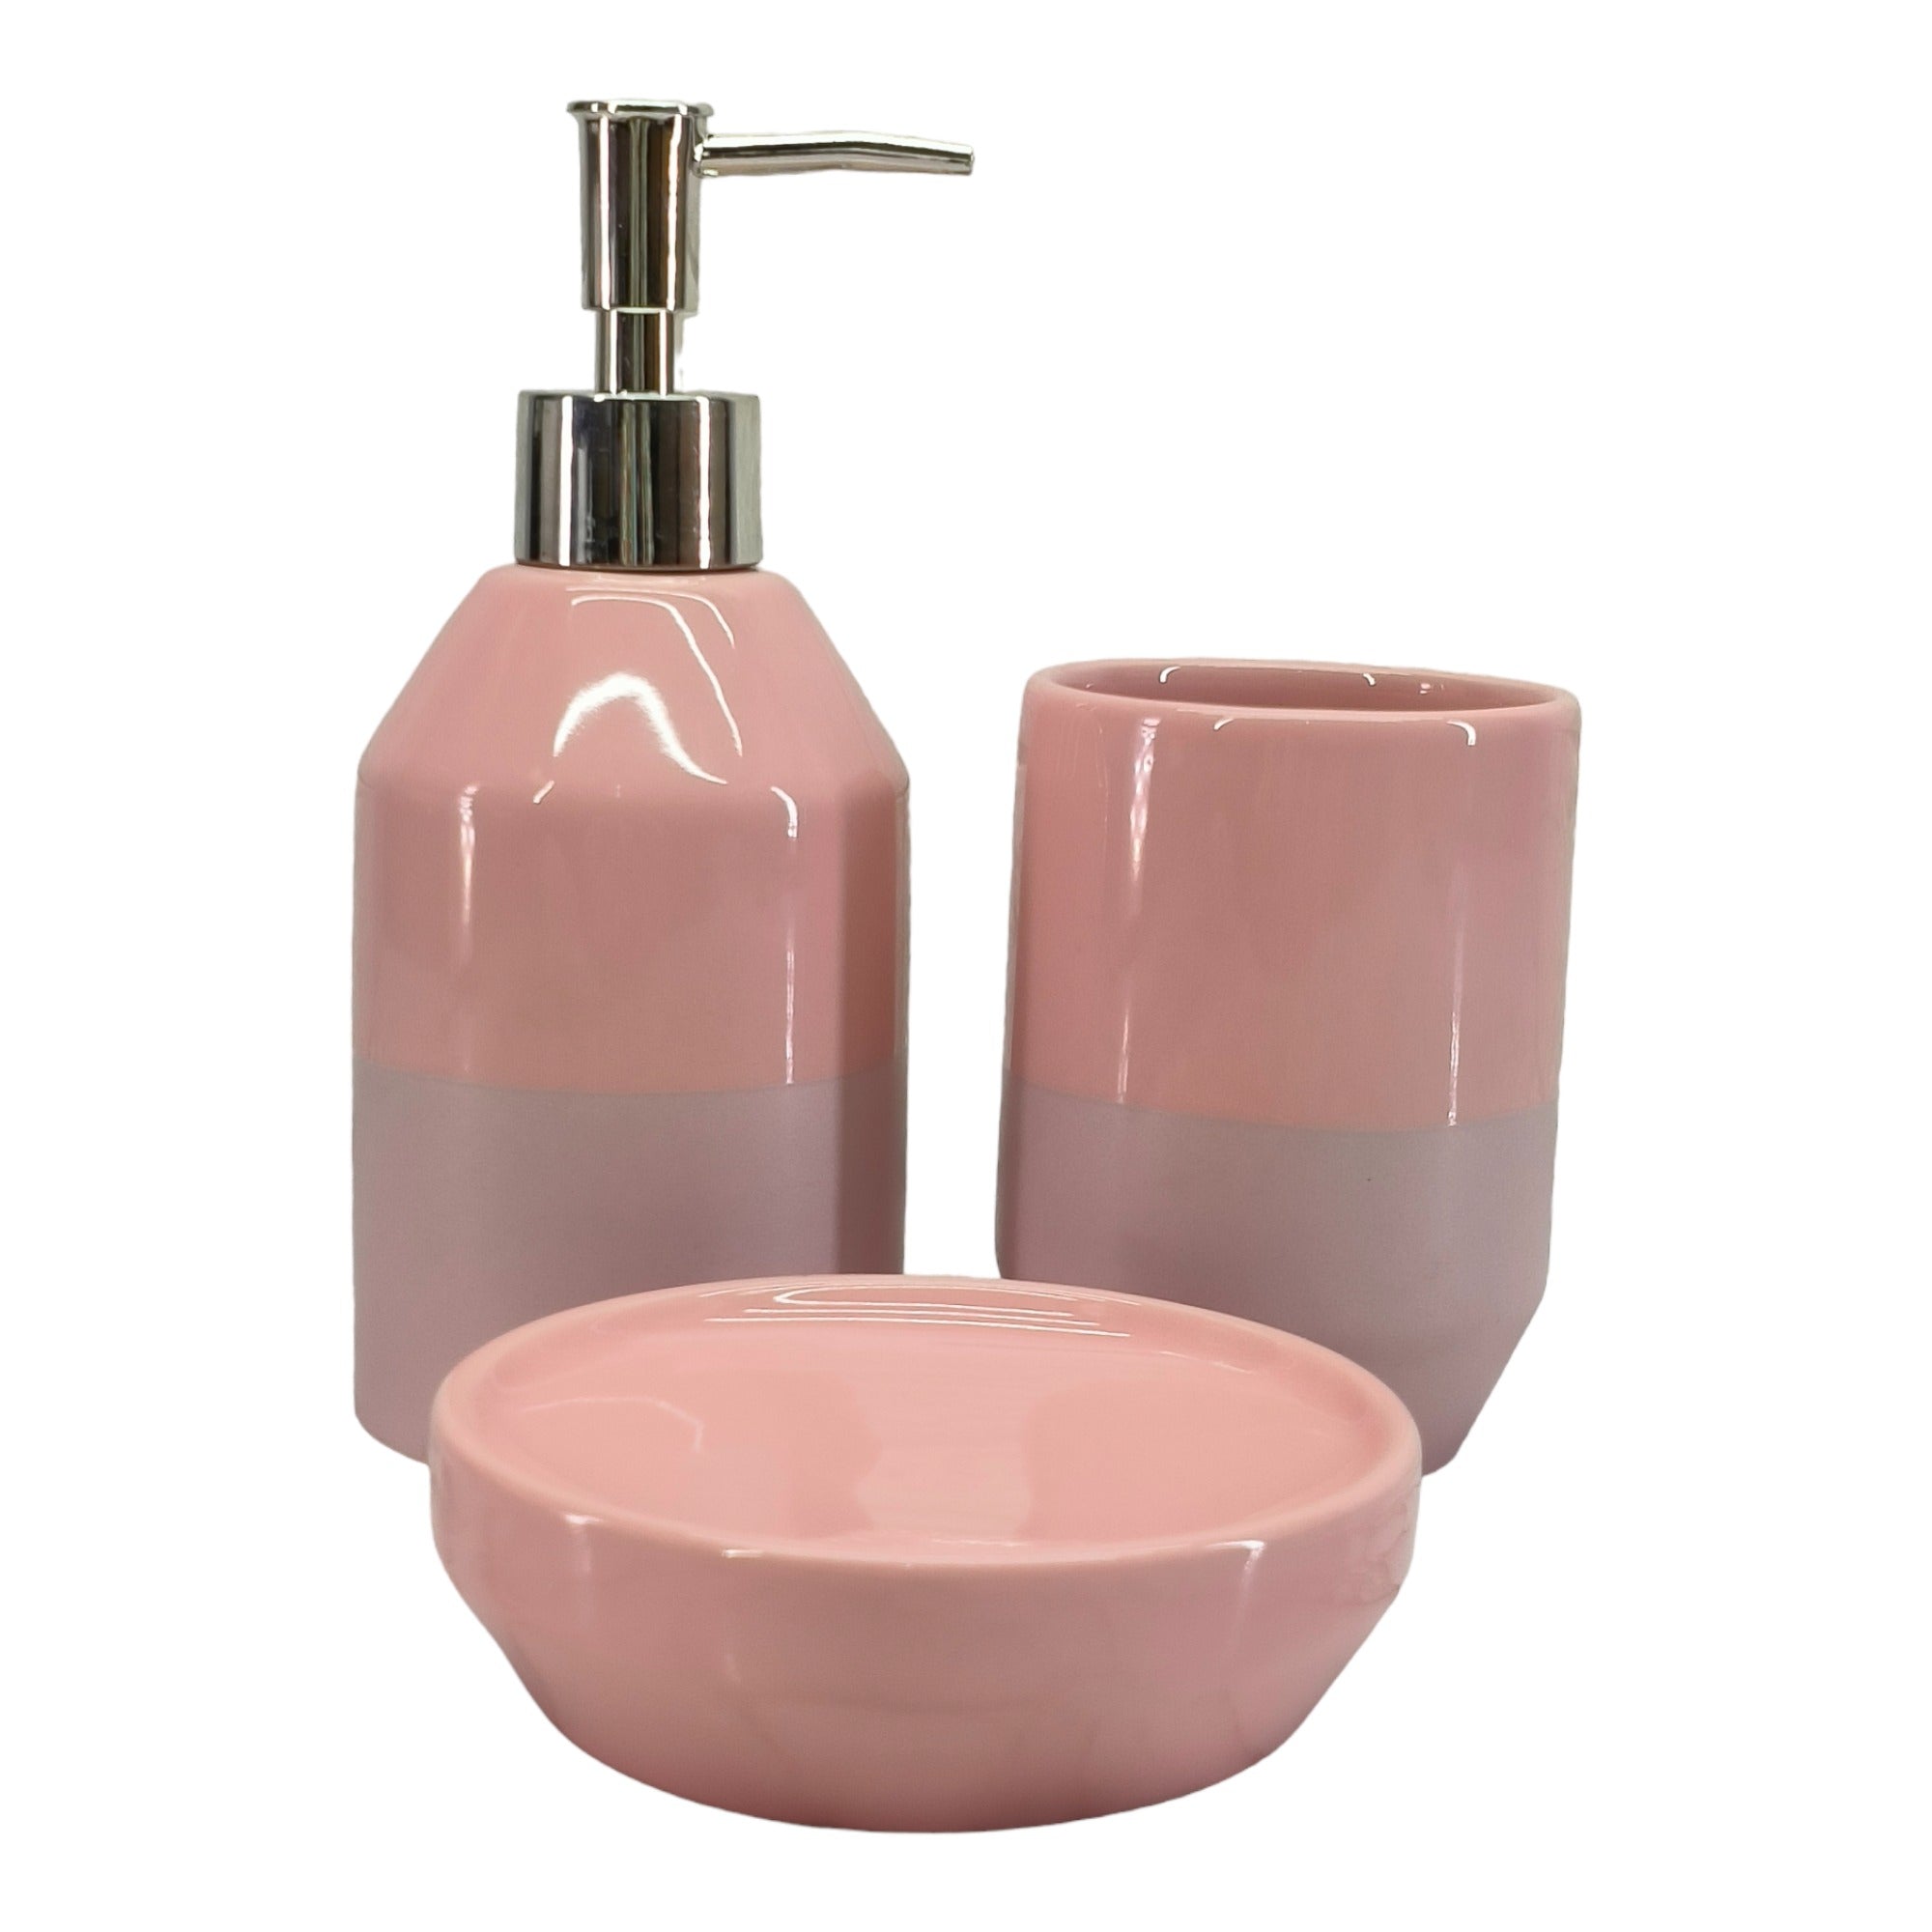 Ceramic Soap Dispenser Set with Toothbrush Holder and Soap Dish, Set of 3 Bathroom Accessories for Home (C3124)